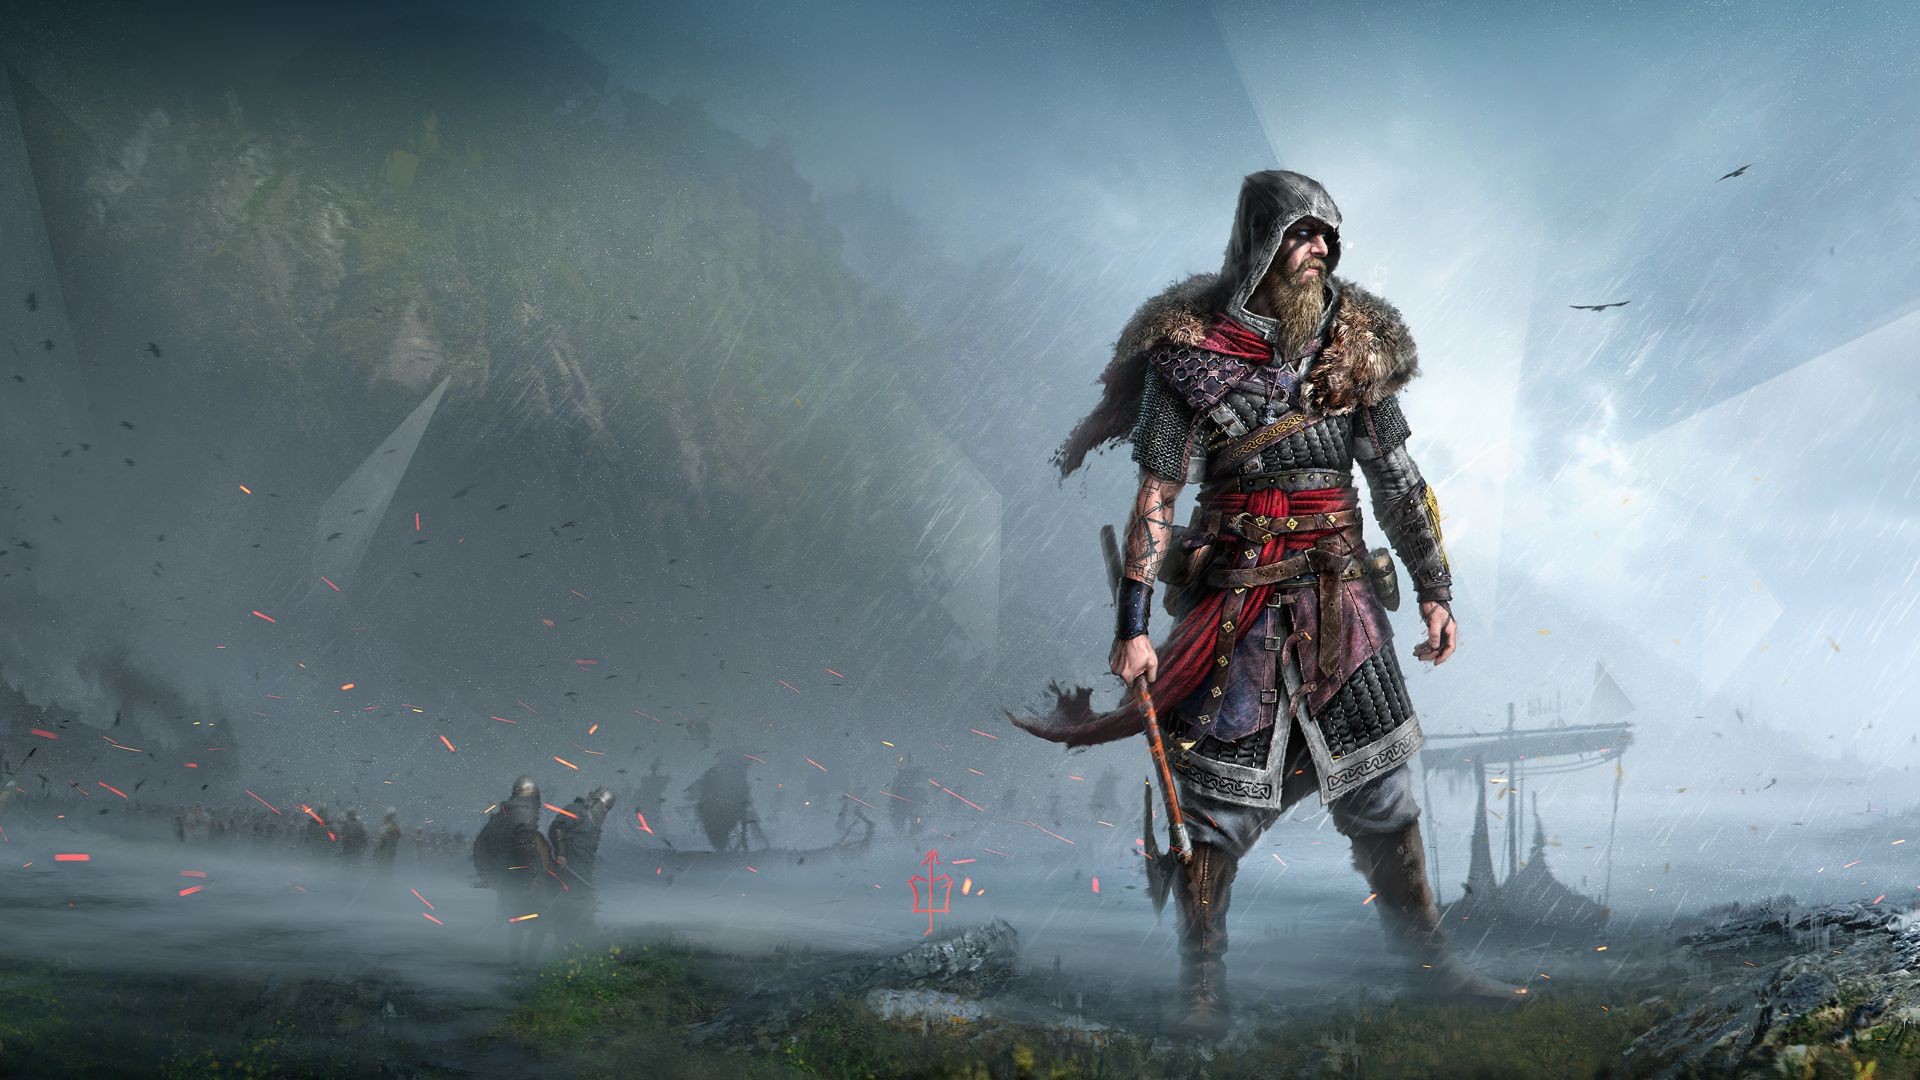 Warriors of Assassin's Creed Valhalla Wallpapers